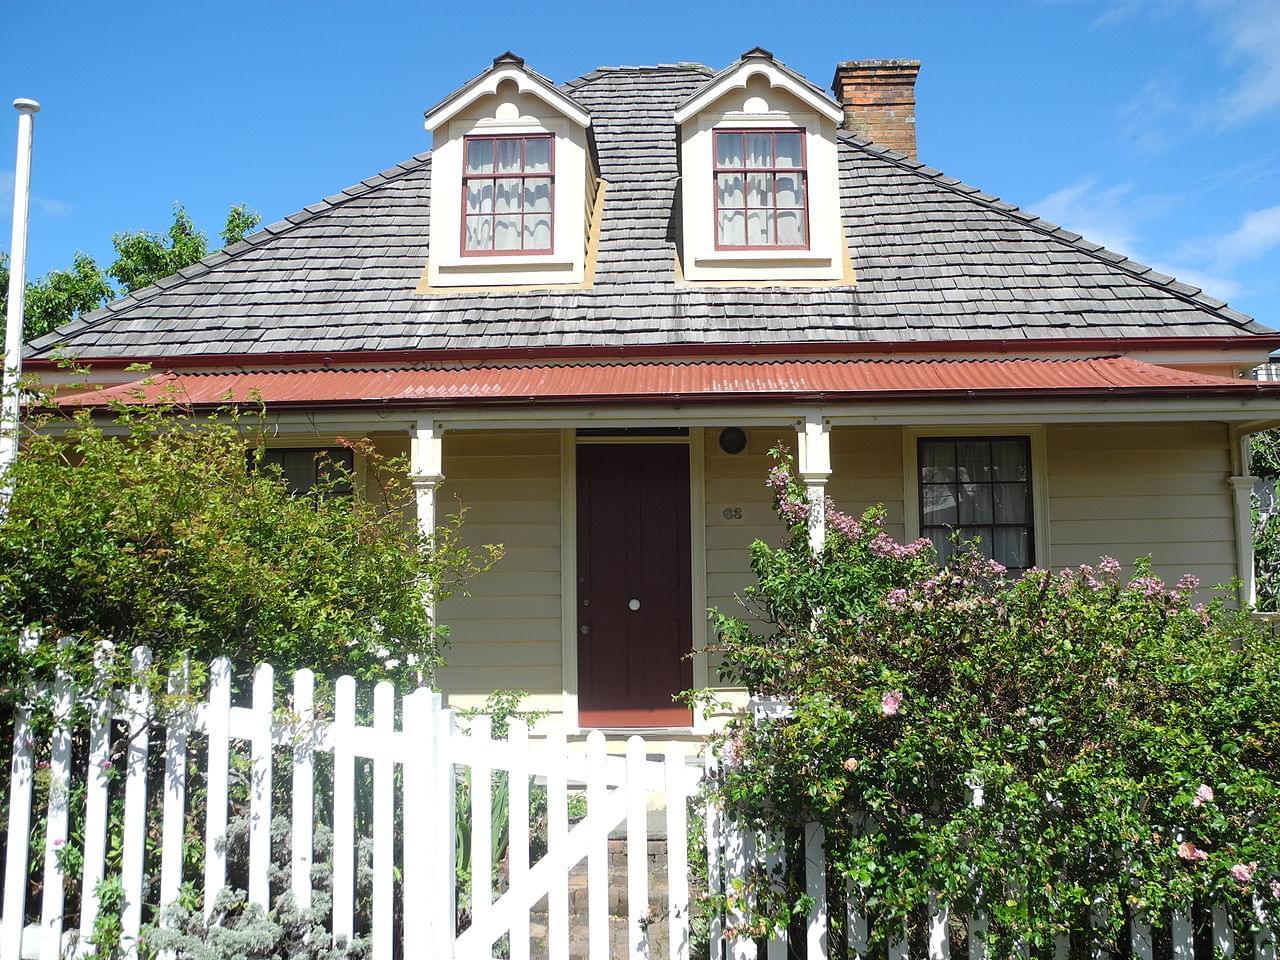 Nairn Street Cottage Overview